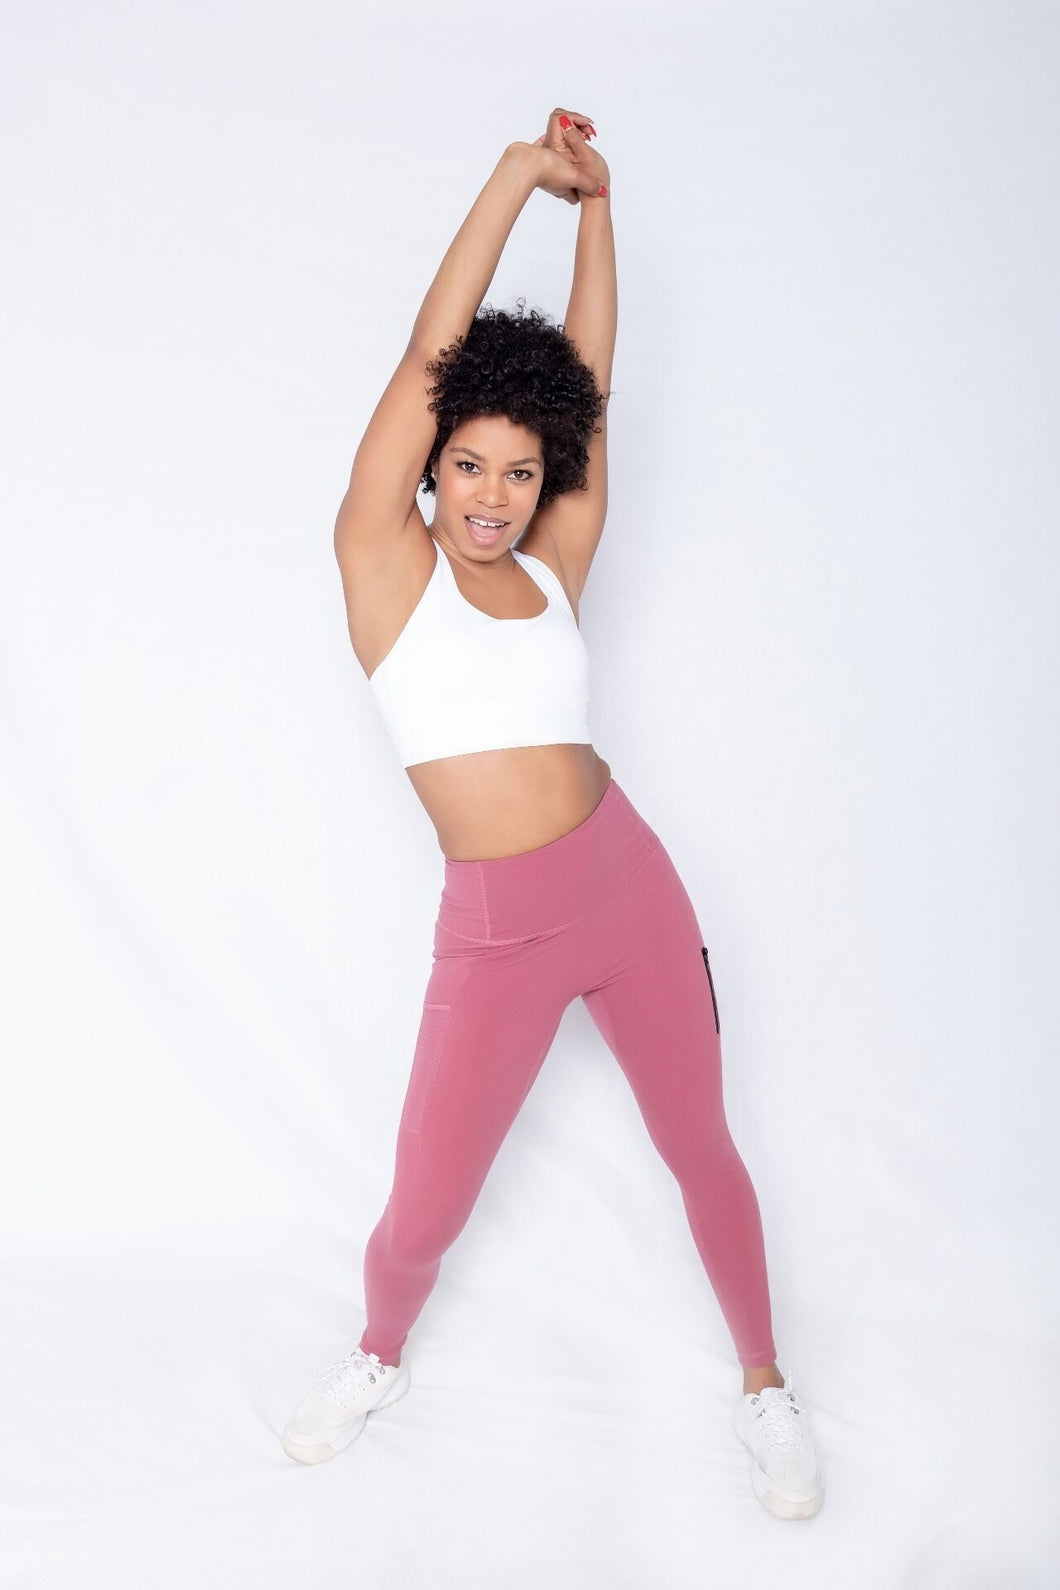 Shakolo crossover brain white and high waist leggings in pink front view model with two hands stretch over head